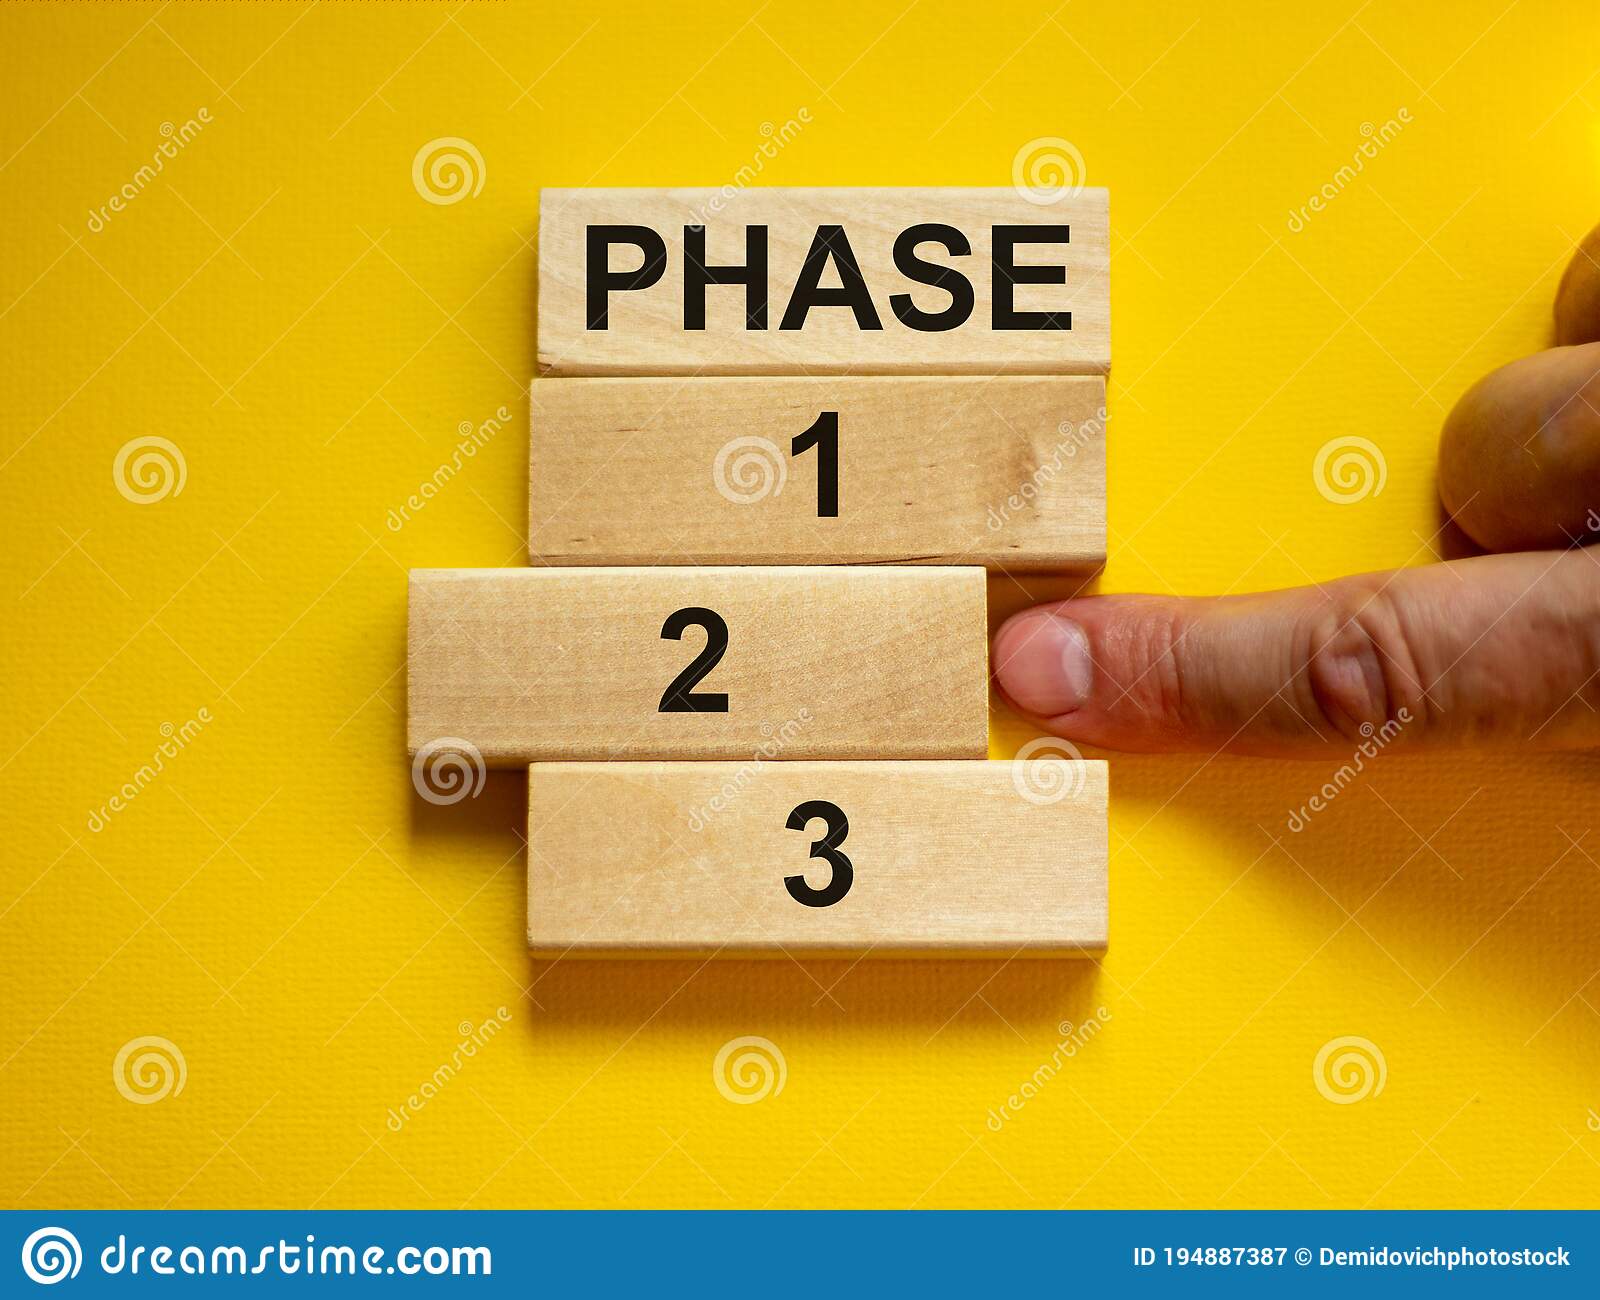 what-is-a-phase-2-esa